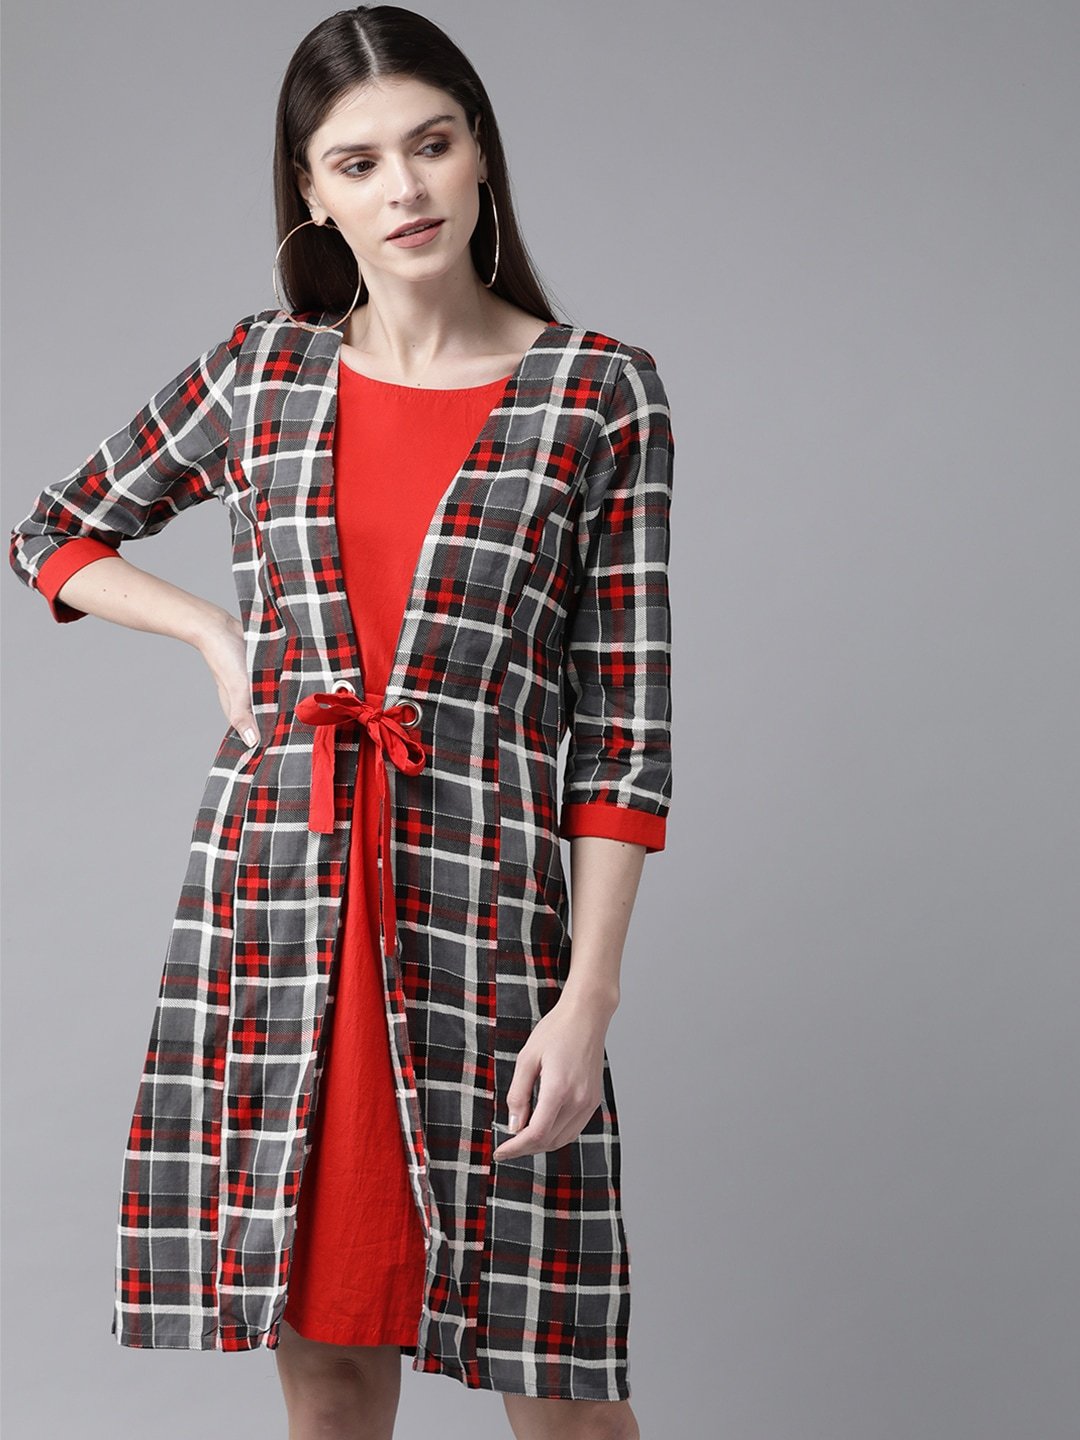 Women's  Grey & Red Checked Layered A-Line Dress - AKS